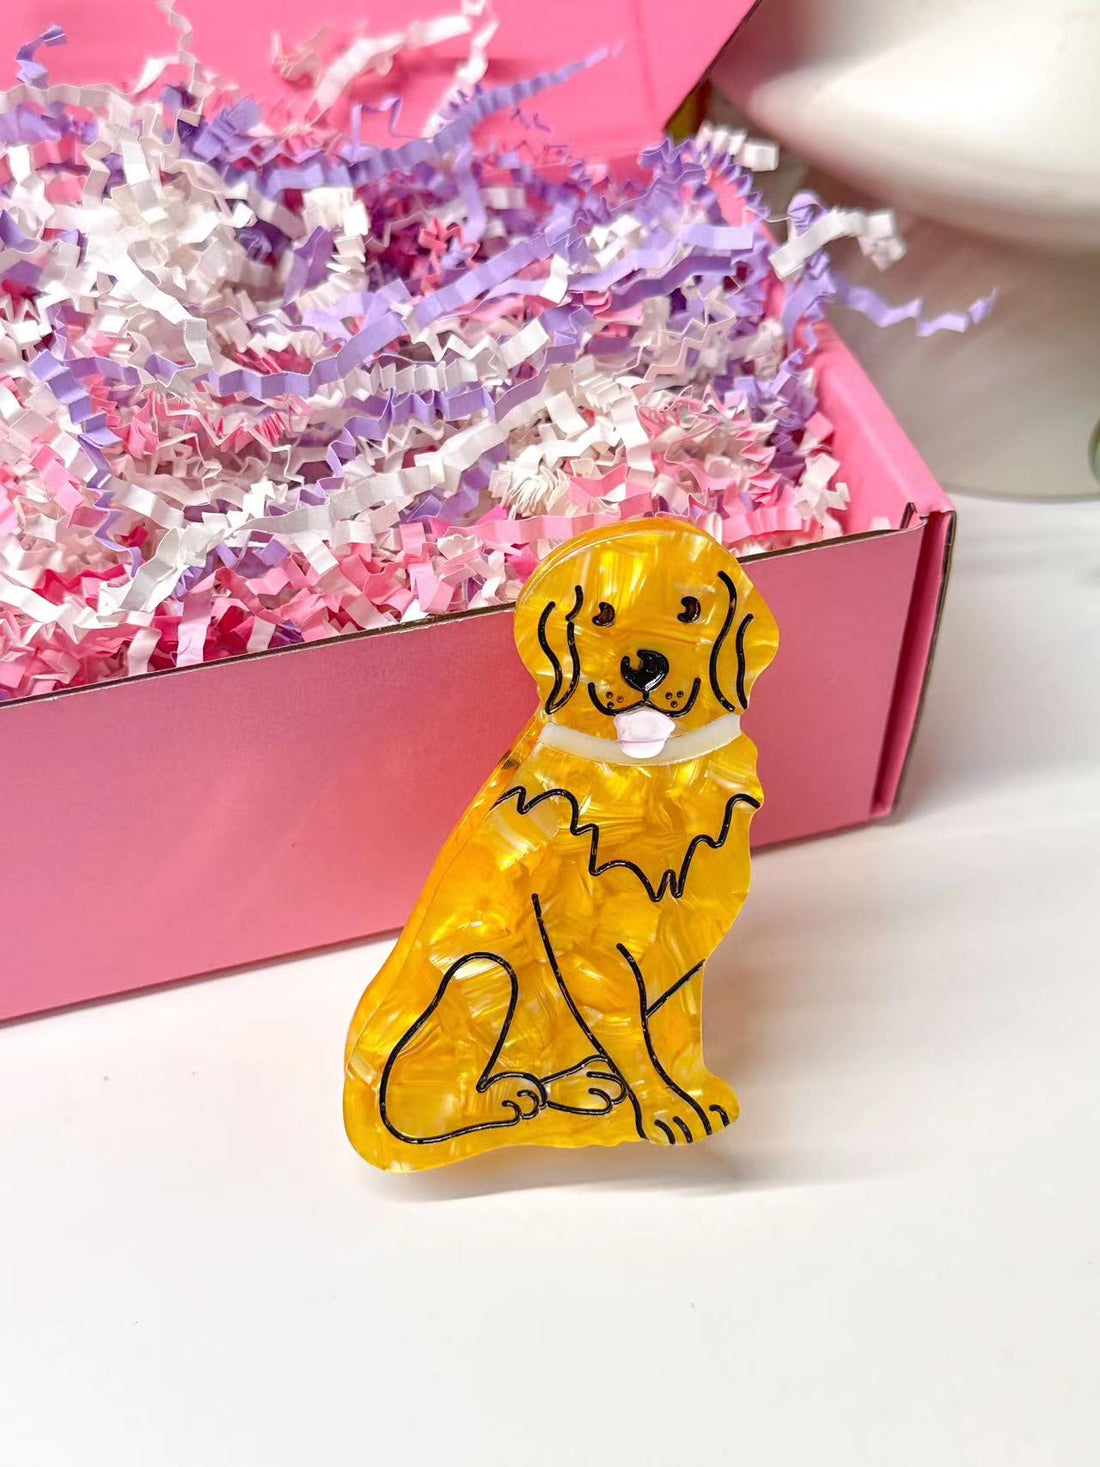 Accessorize with Adorability: Introducing Our Golden Retriever Hair Clip Claw!